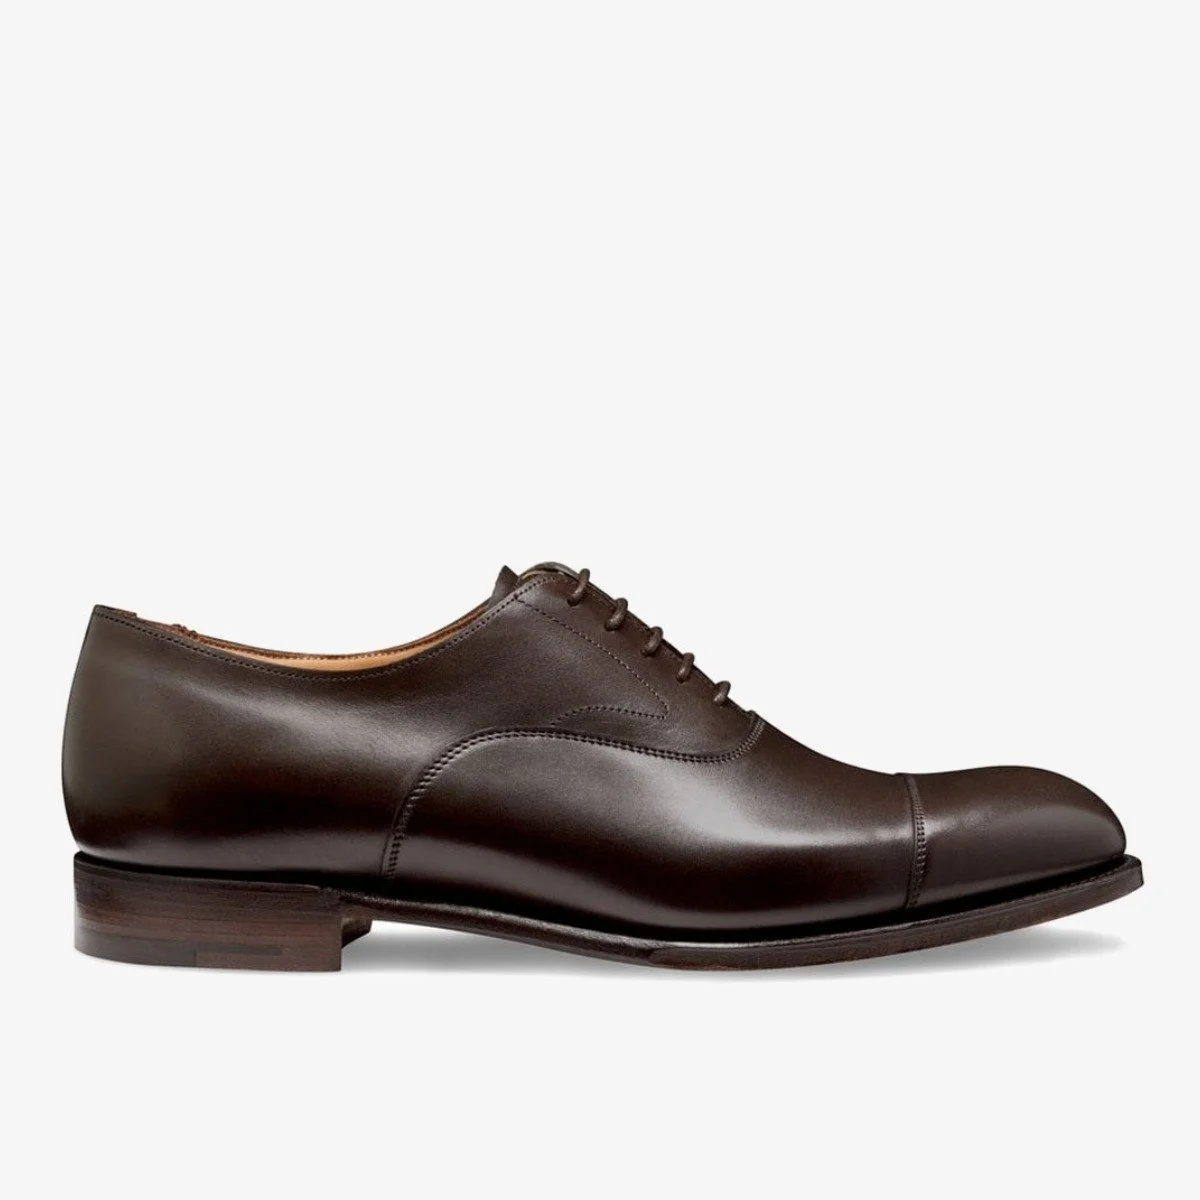 Cheaney Alfred mocha toe cap oxford shoes